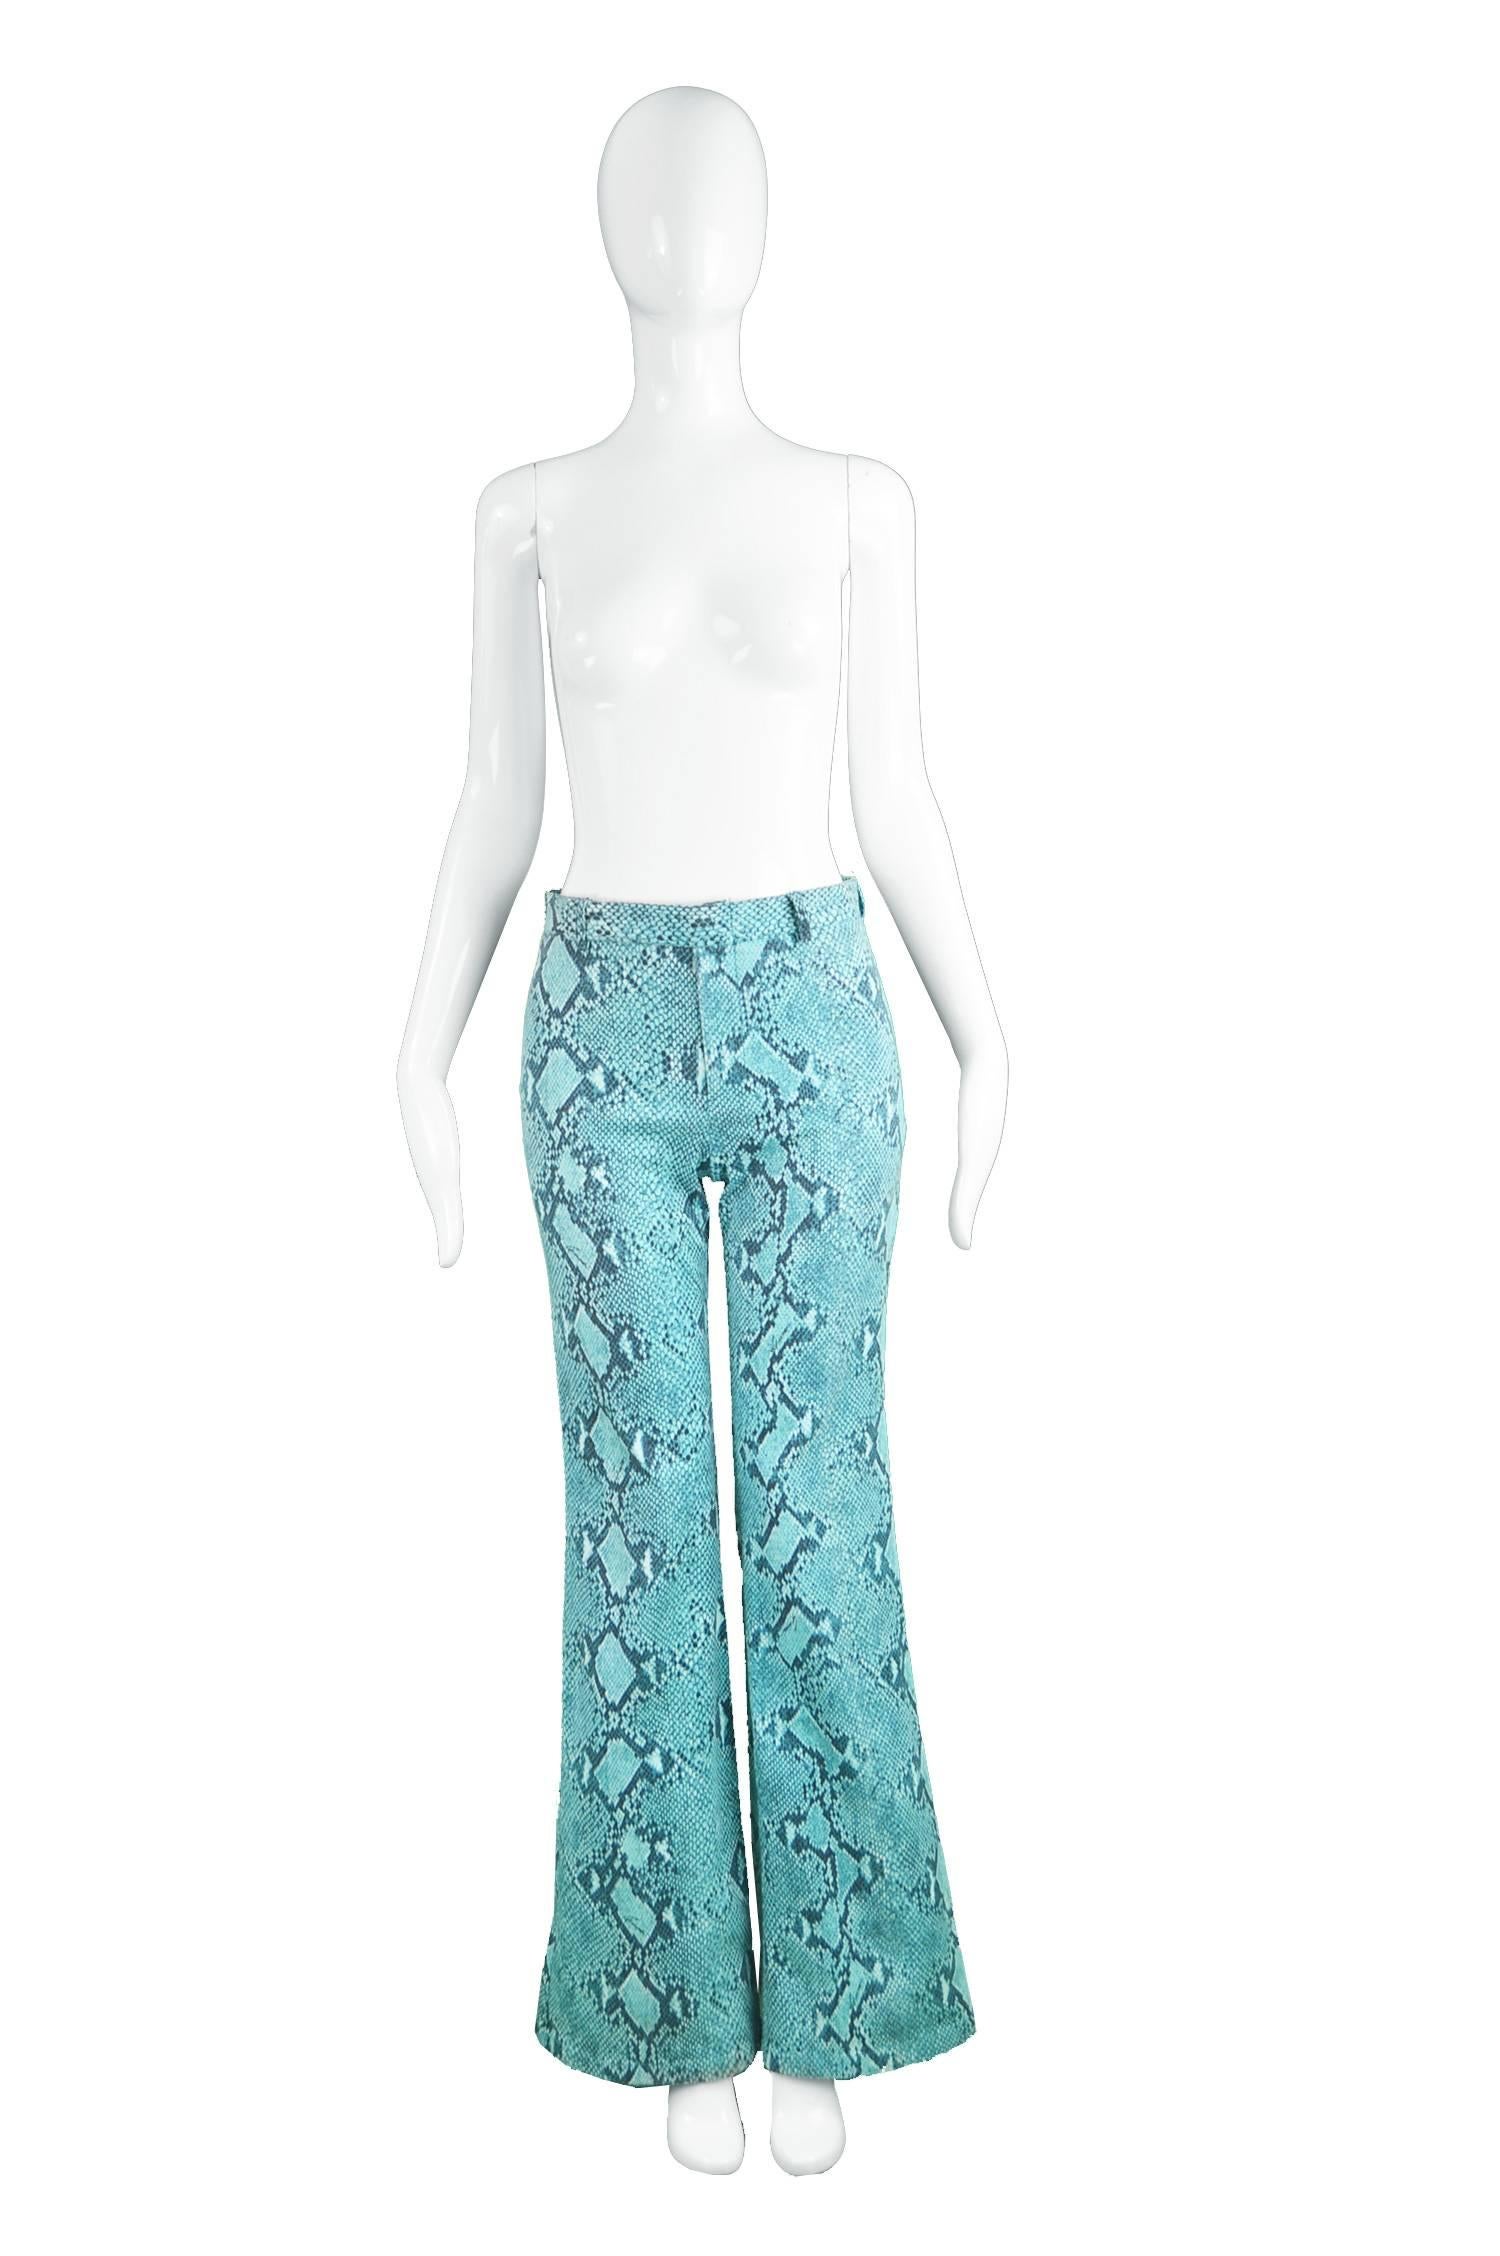 Tom Ford for Gucci Blue Cotton Snakeskin Print Flared Pants, S/S 2000

Size: Marked 40 but fits more like a modern UK 10/ US 6/ EU 38. Please check measurements. 
Waist - 29” / 73cm
Hips - 38” / 98cm
Rise - 12” / 30cm
Inside Leg - 34” / 86cm

An